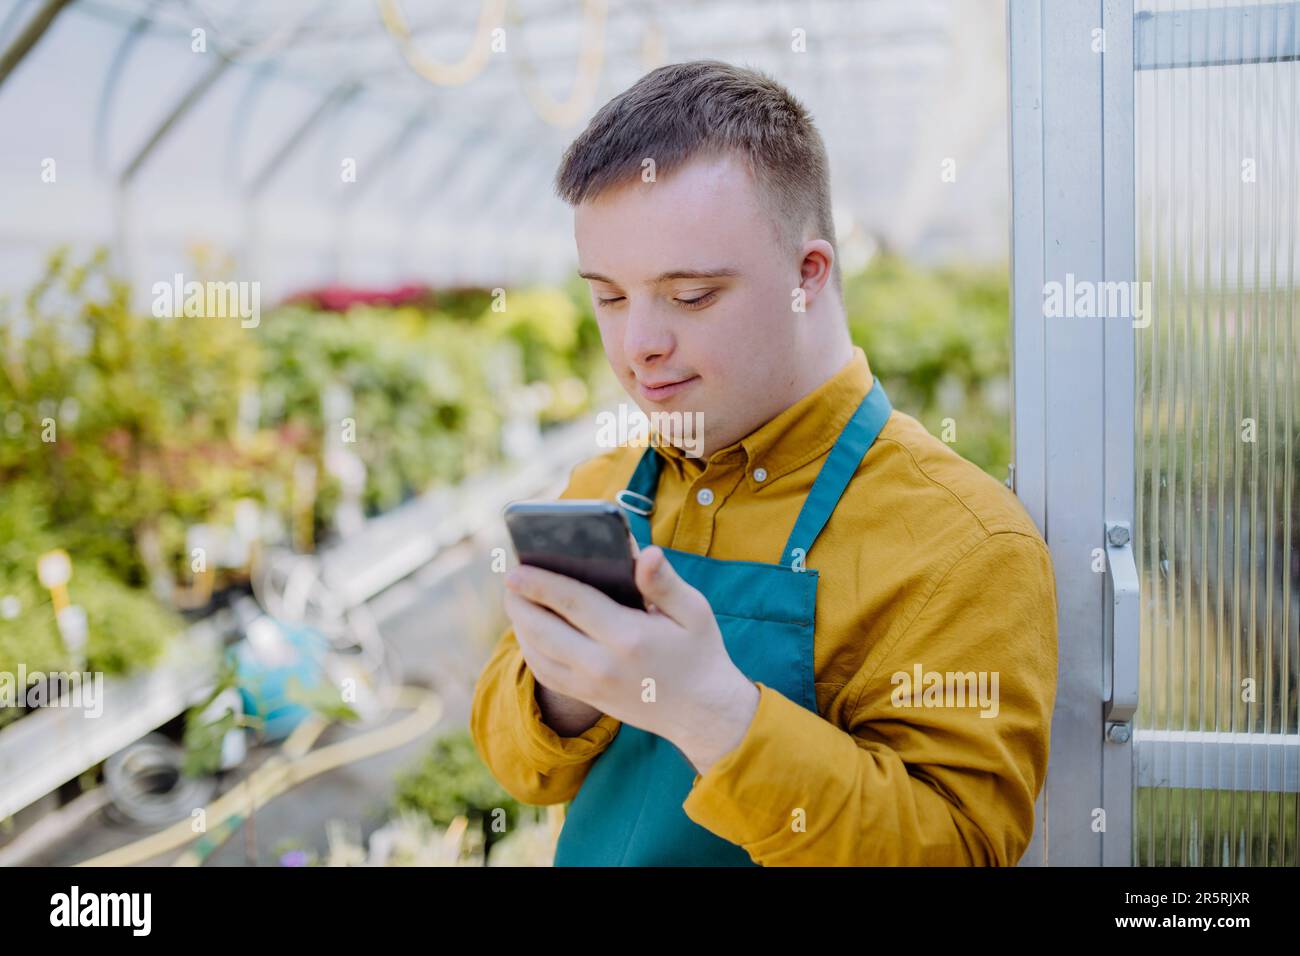 Young employee with Down syndrome working in garden centre, standing in door of greenhouse with cellphone. Stock Photo